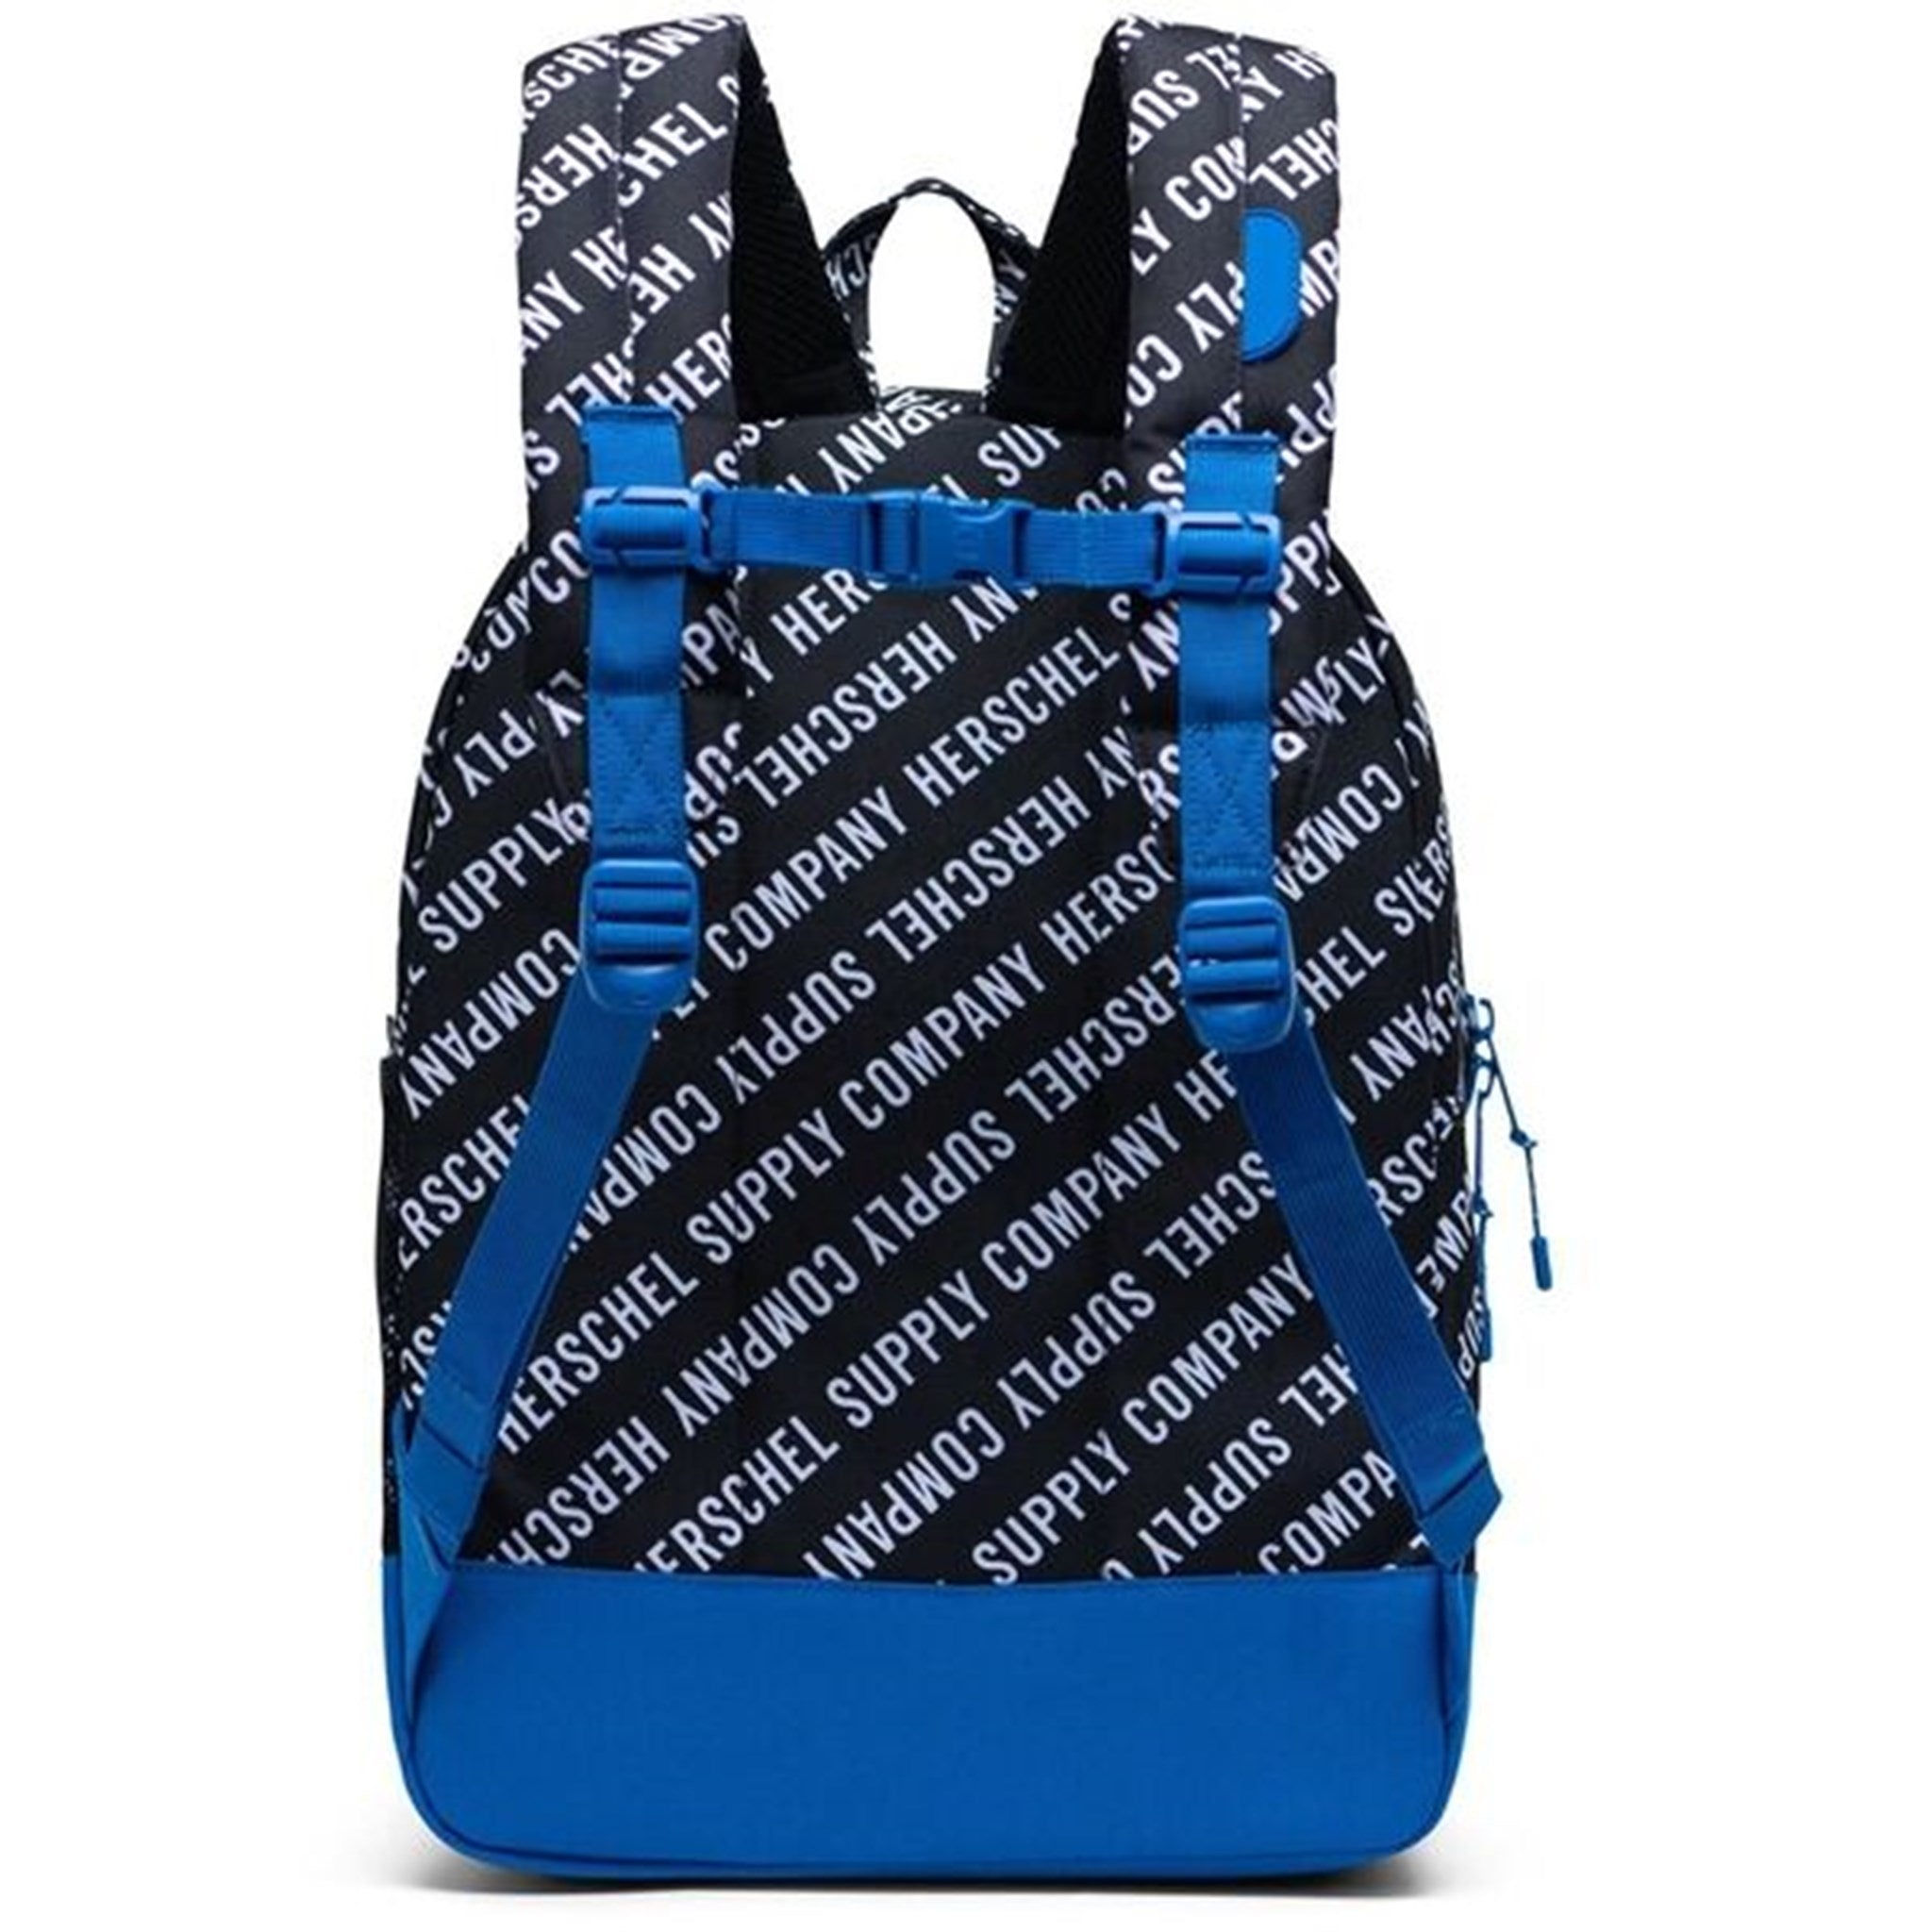 Herschel Heritage Youth XL Backpack Roll Call Black/White/Lapis Blue 4